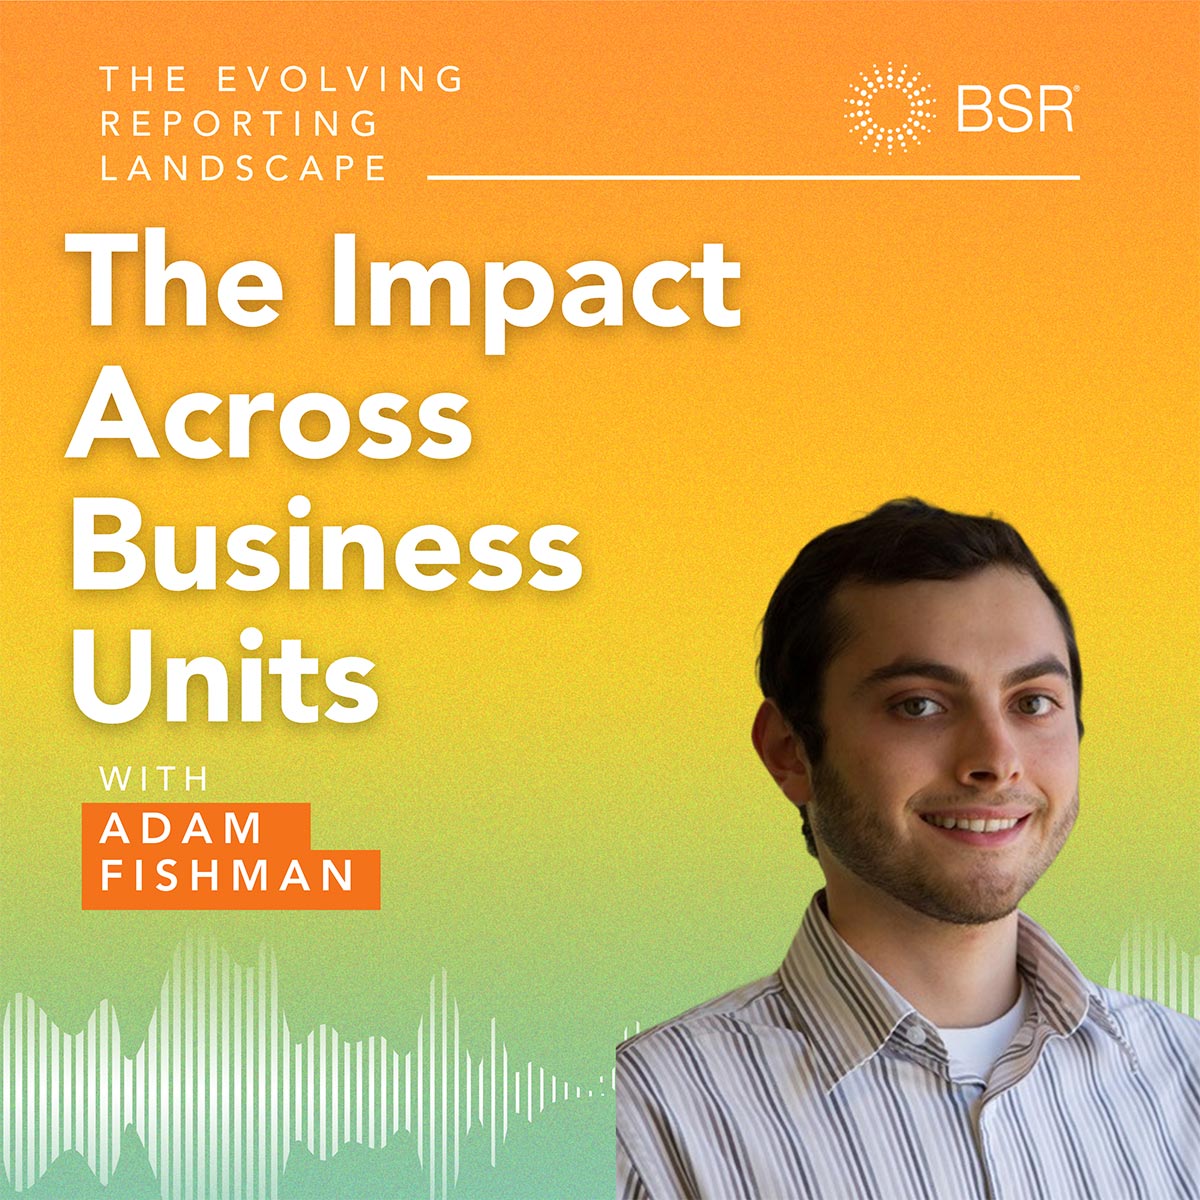 The Impact Across Business Units with Adam Fishman thumbnail image